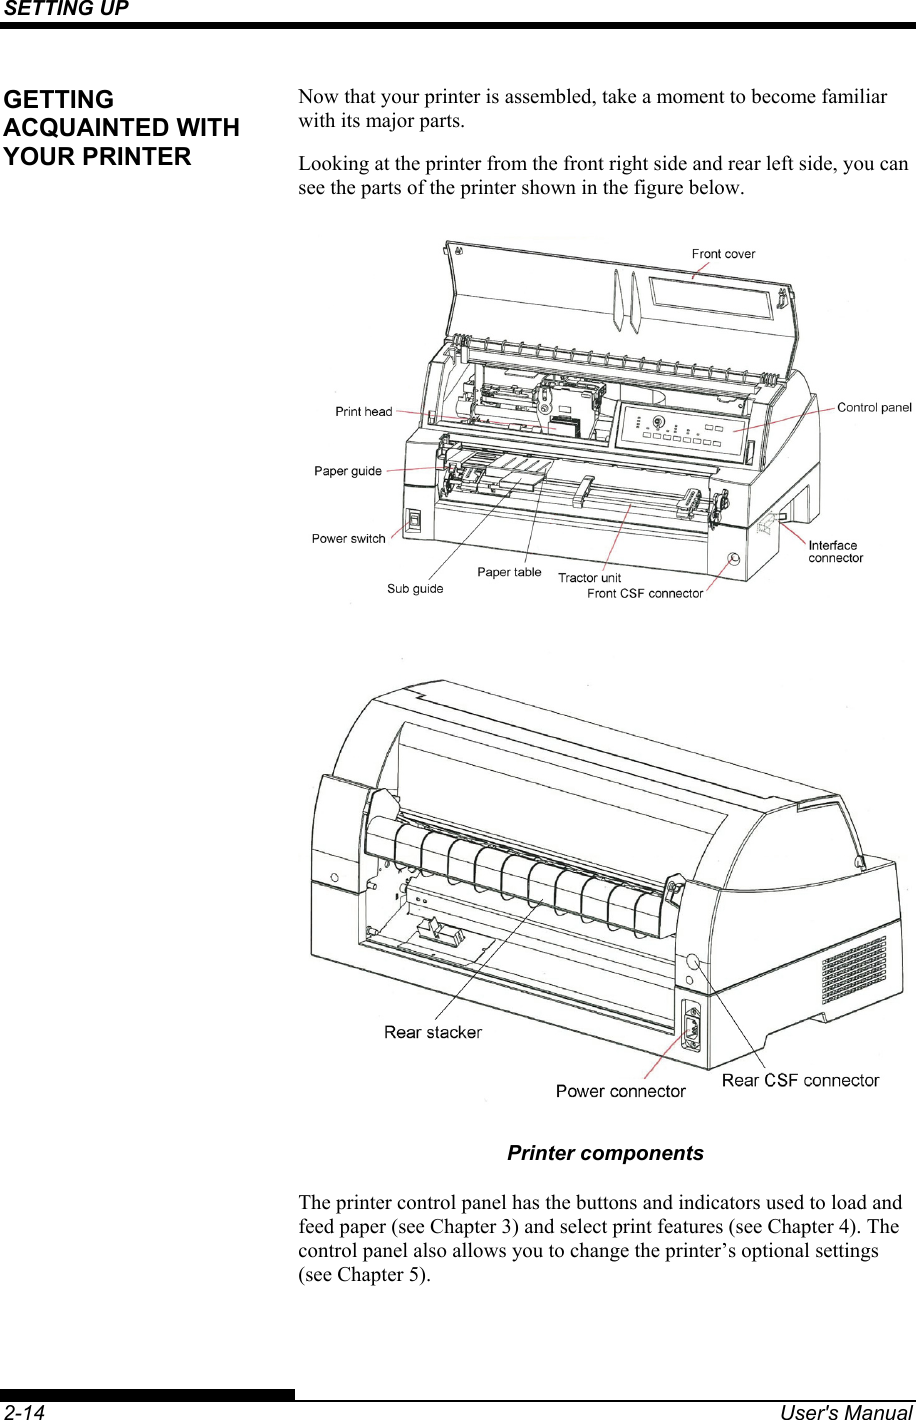 SETTING UP    2-14  User&apos;s Manual Now that your printer is assembled, take a moment to become familiar with its major parts. Looking at the printer from the front right side and rear left side, you can see the parts of the printer shown in the figure below.   Printer components The printer control panel has the buttons and indicators used to load and feed paper (see Chapter 3) and select print features (see Chapter 4). The control panel also allows you to change the printer’s optional settings (see Chapter 5).  GETTING ACQUAINTED WITH YOUR PRINTER 